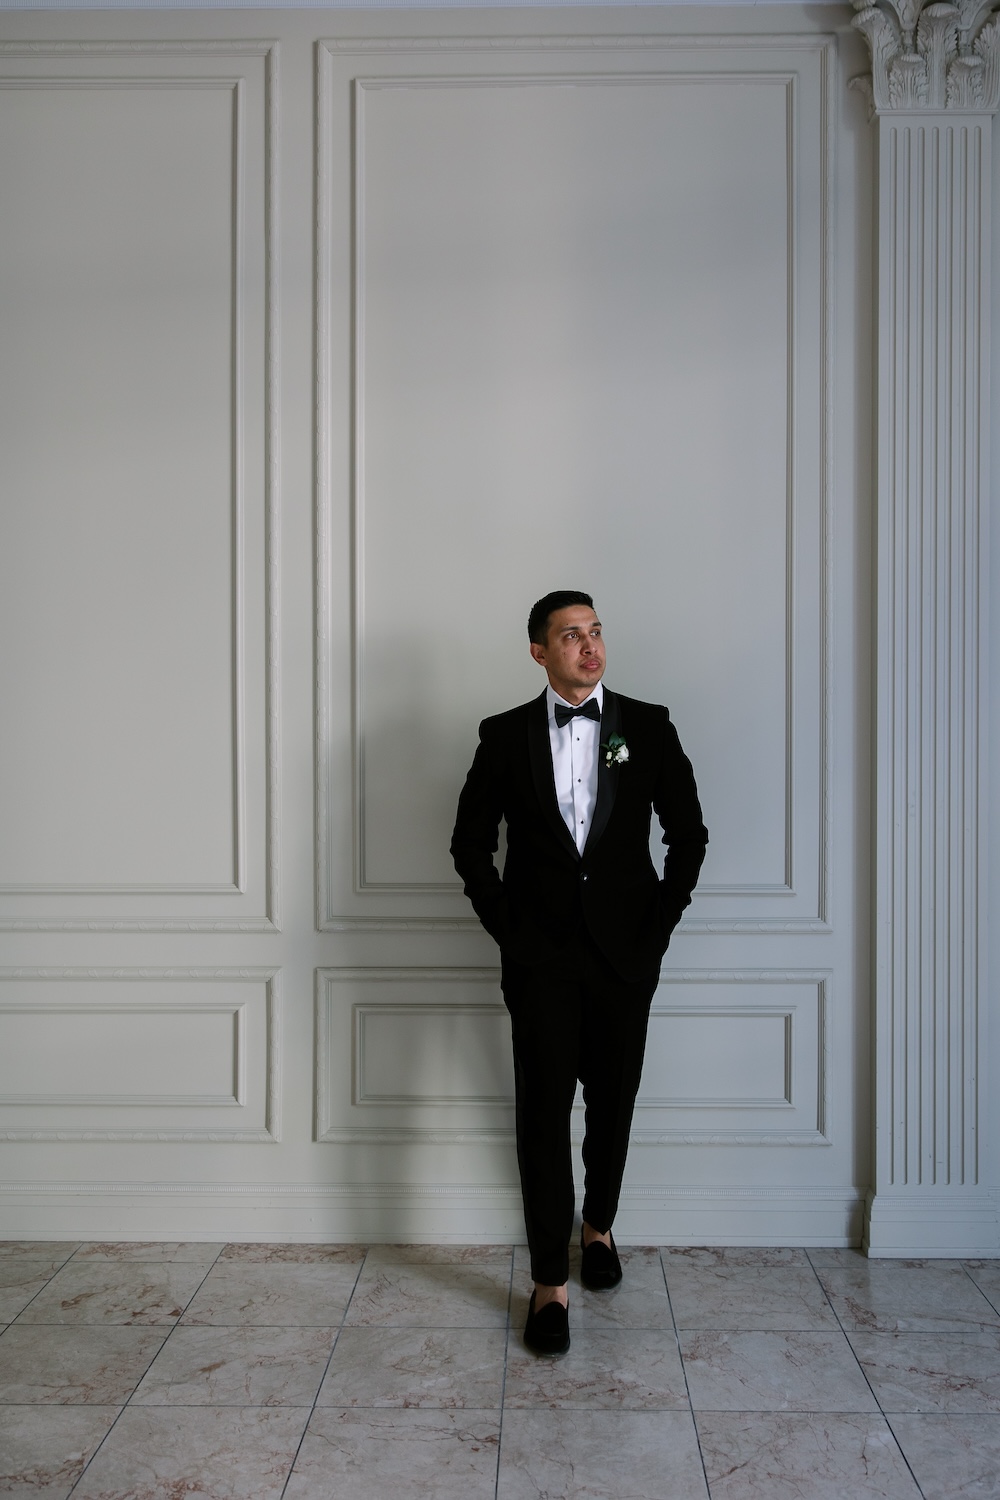 Formal posed portrait of groom in tuxedo in museum room. Modern Washington DC wedding at National Museum of Women in the Arts. Sarah Bradshaw Photography.